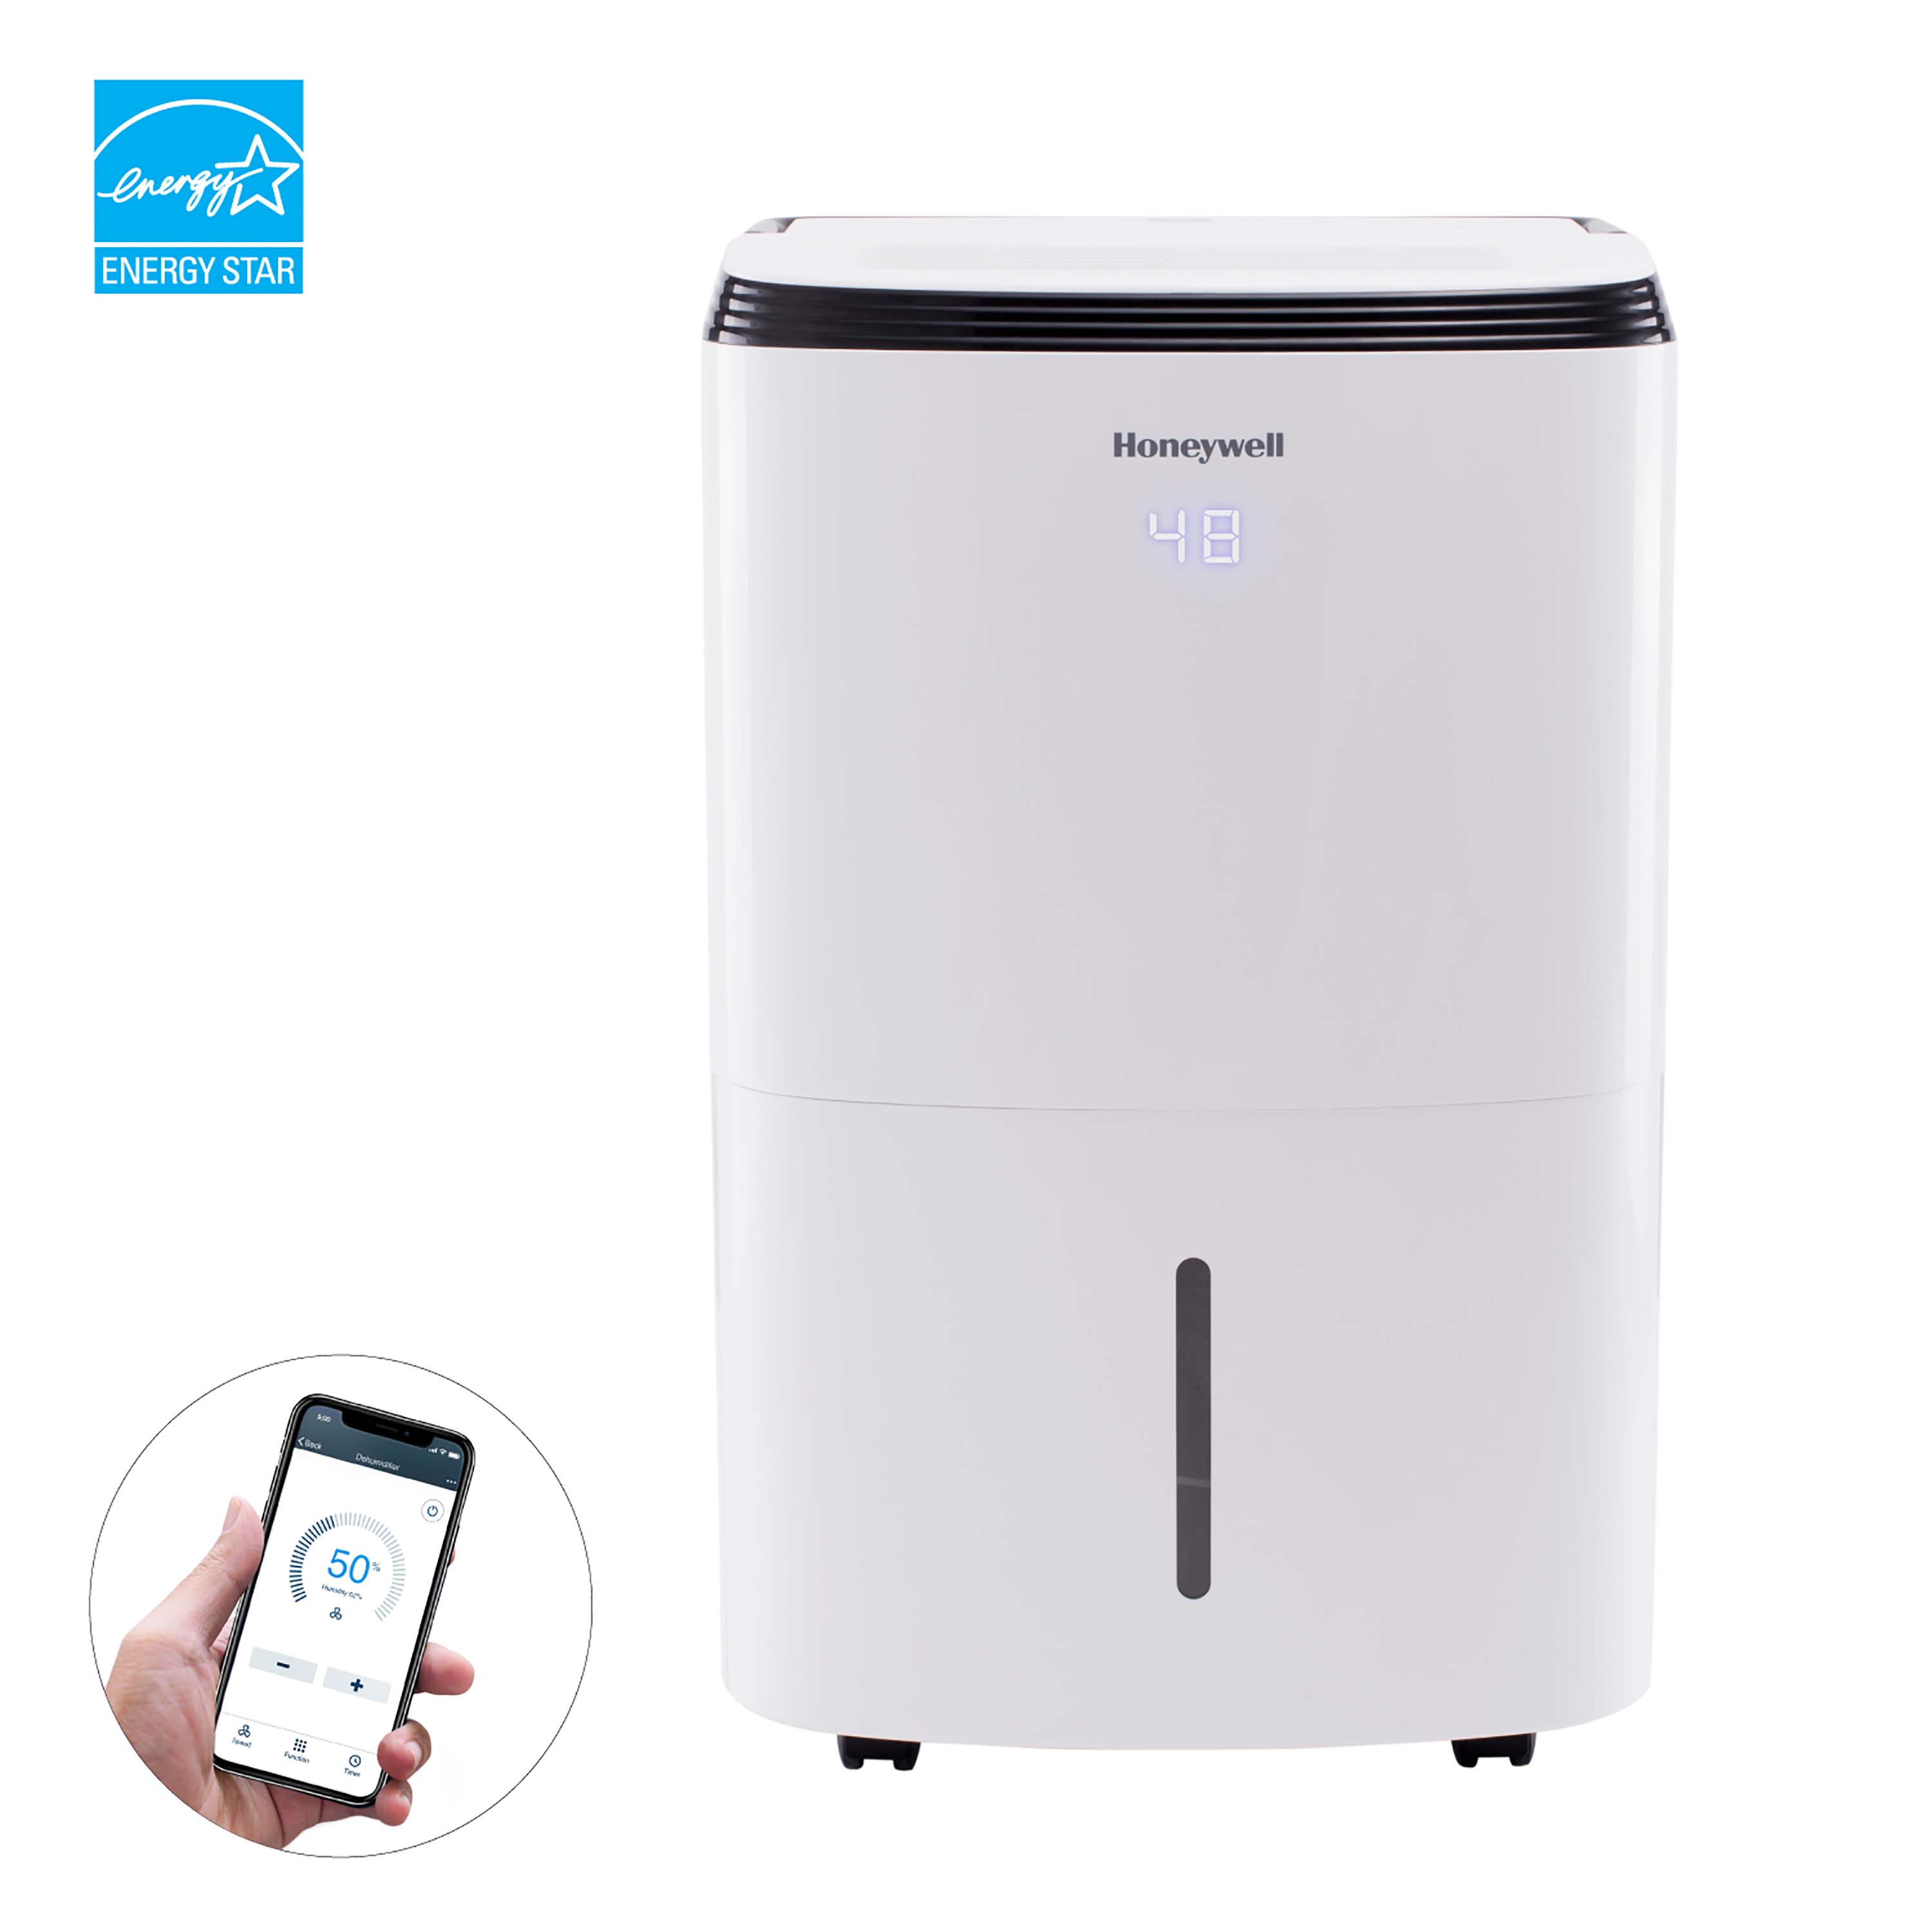  RCA 20-Pint Portable Dehumidifier with Auto-Shutoff & Timer,  Home Dehumidifier and Moisture Absorber For Basement, Garage, Living Room  in White : Home & Kitchen